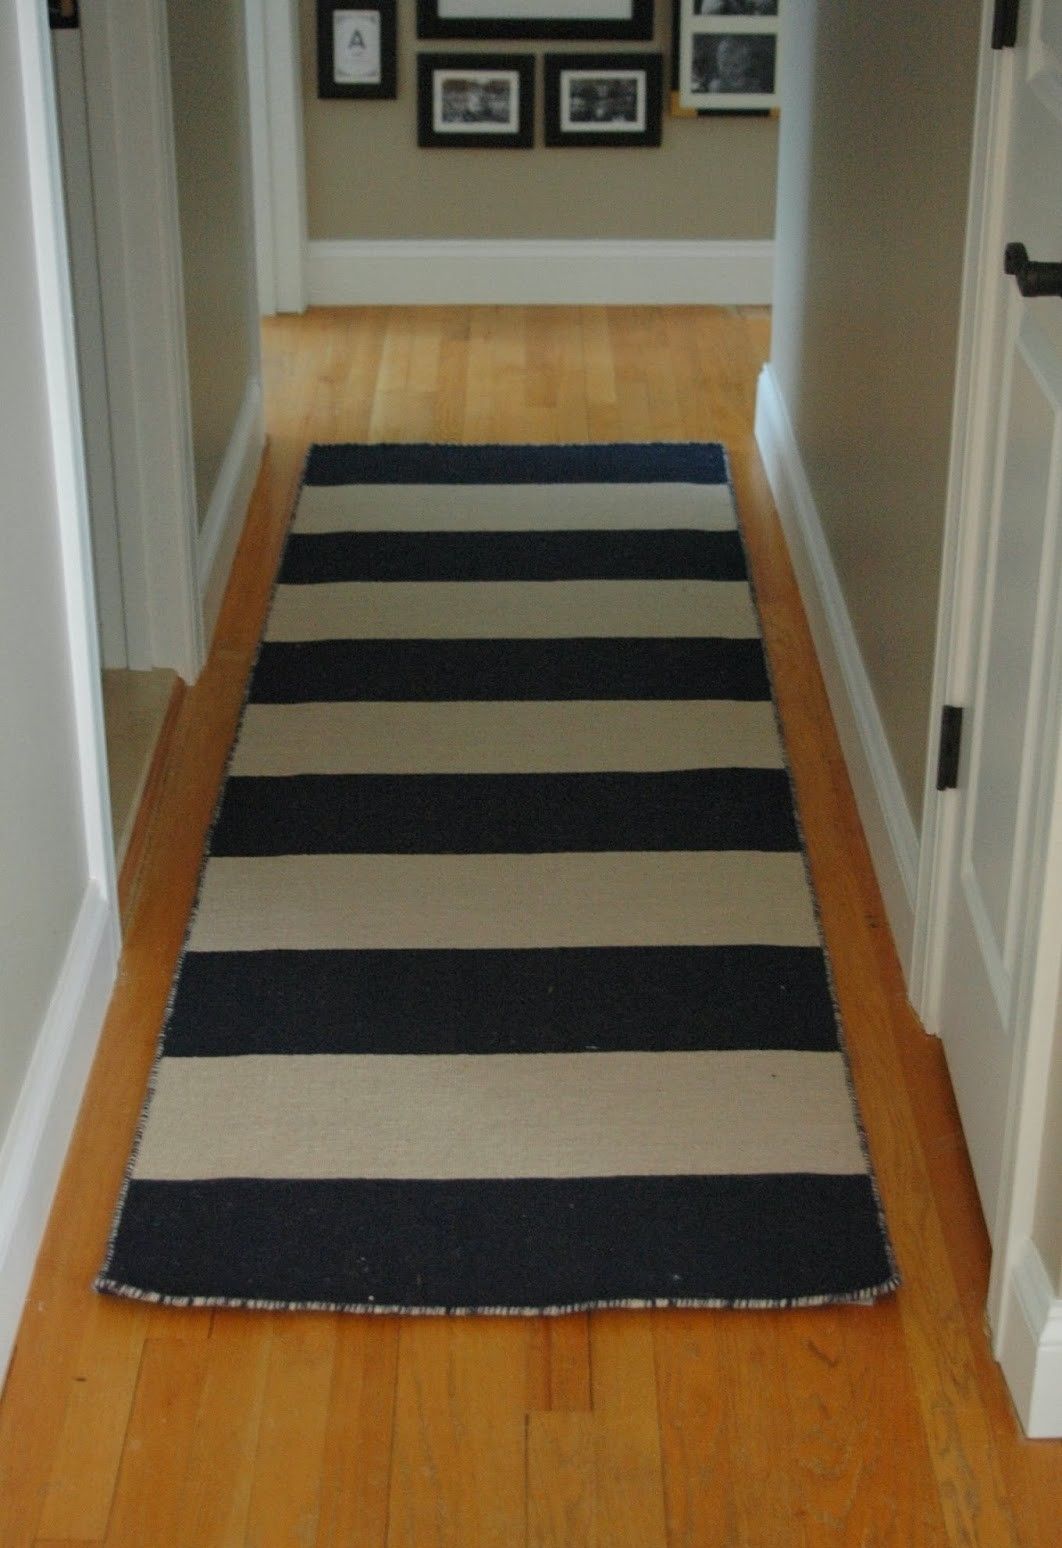 Interior Short Black And White Striped Hallway Runner Rugs With Within Hallway Runner Rugs By The Foot (View 11 of 20)